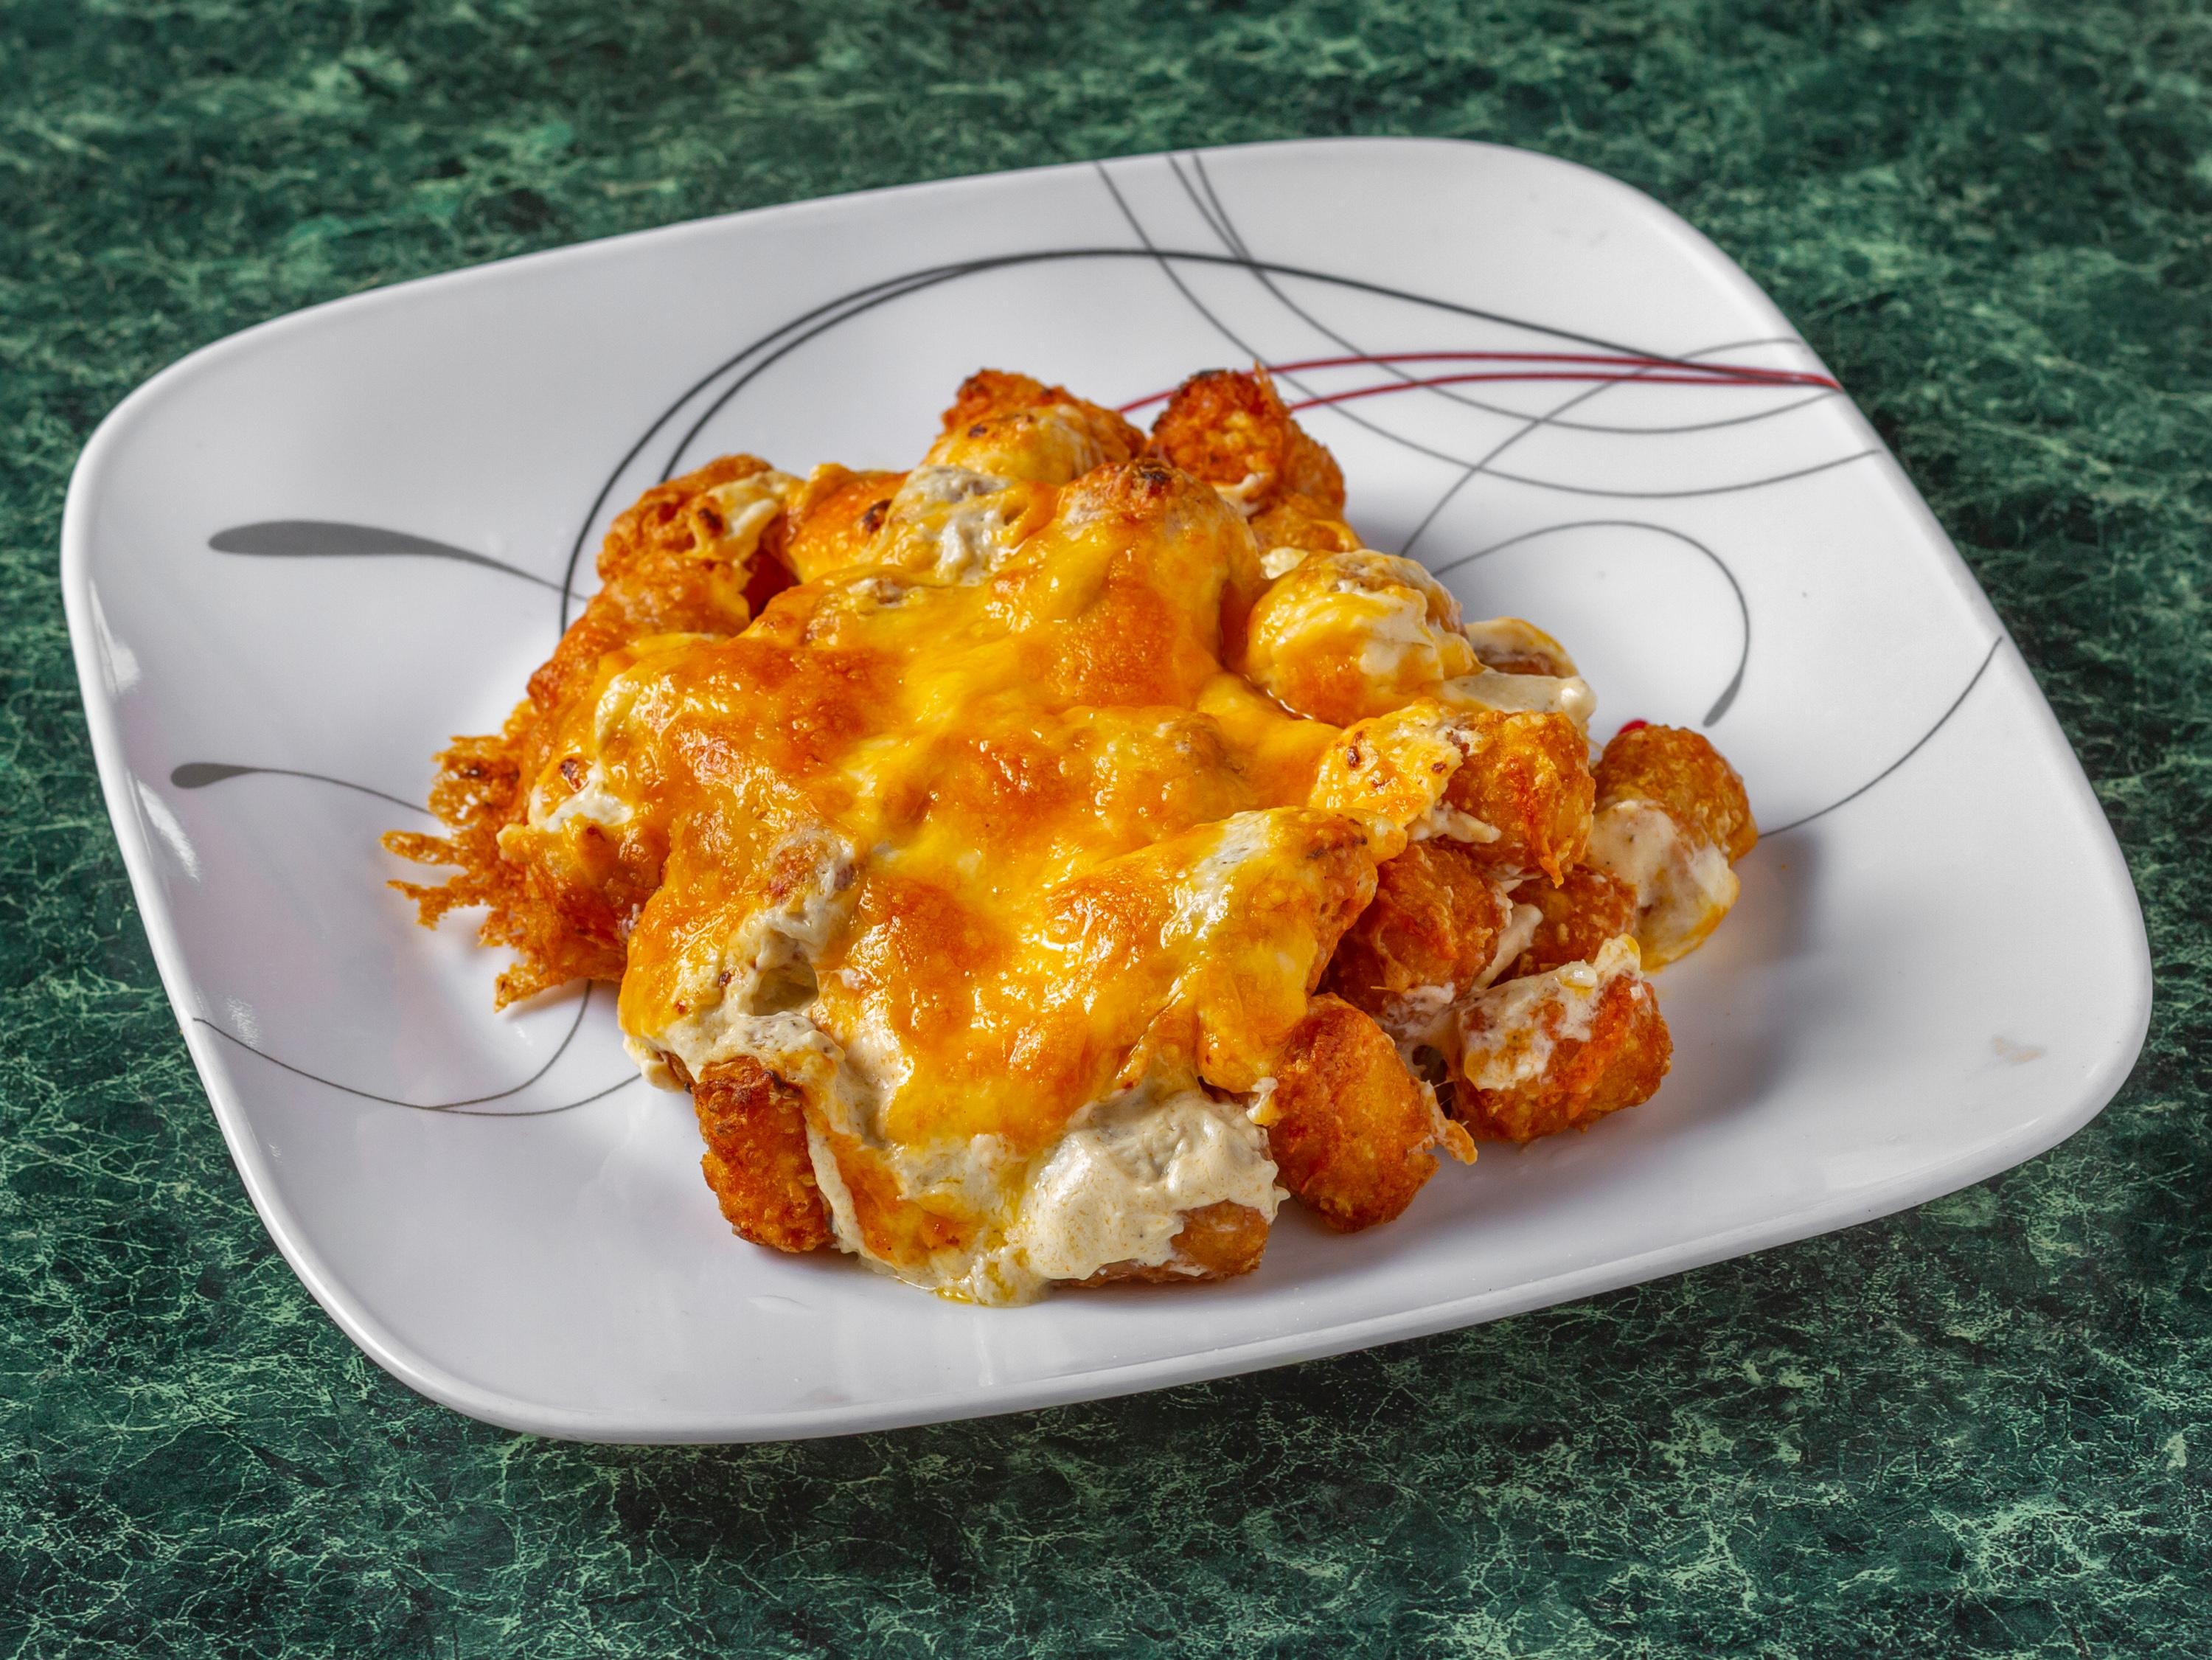 Crabby Tater Tots